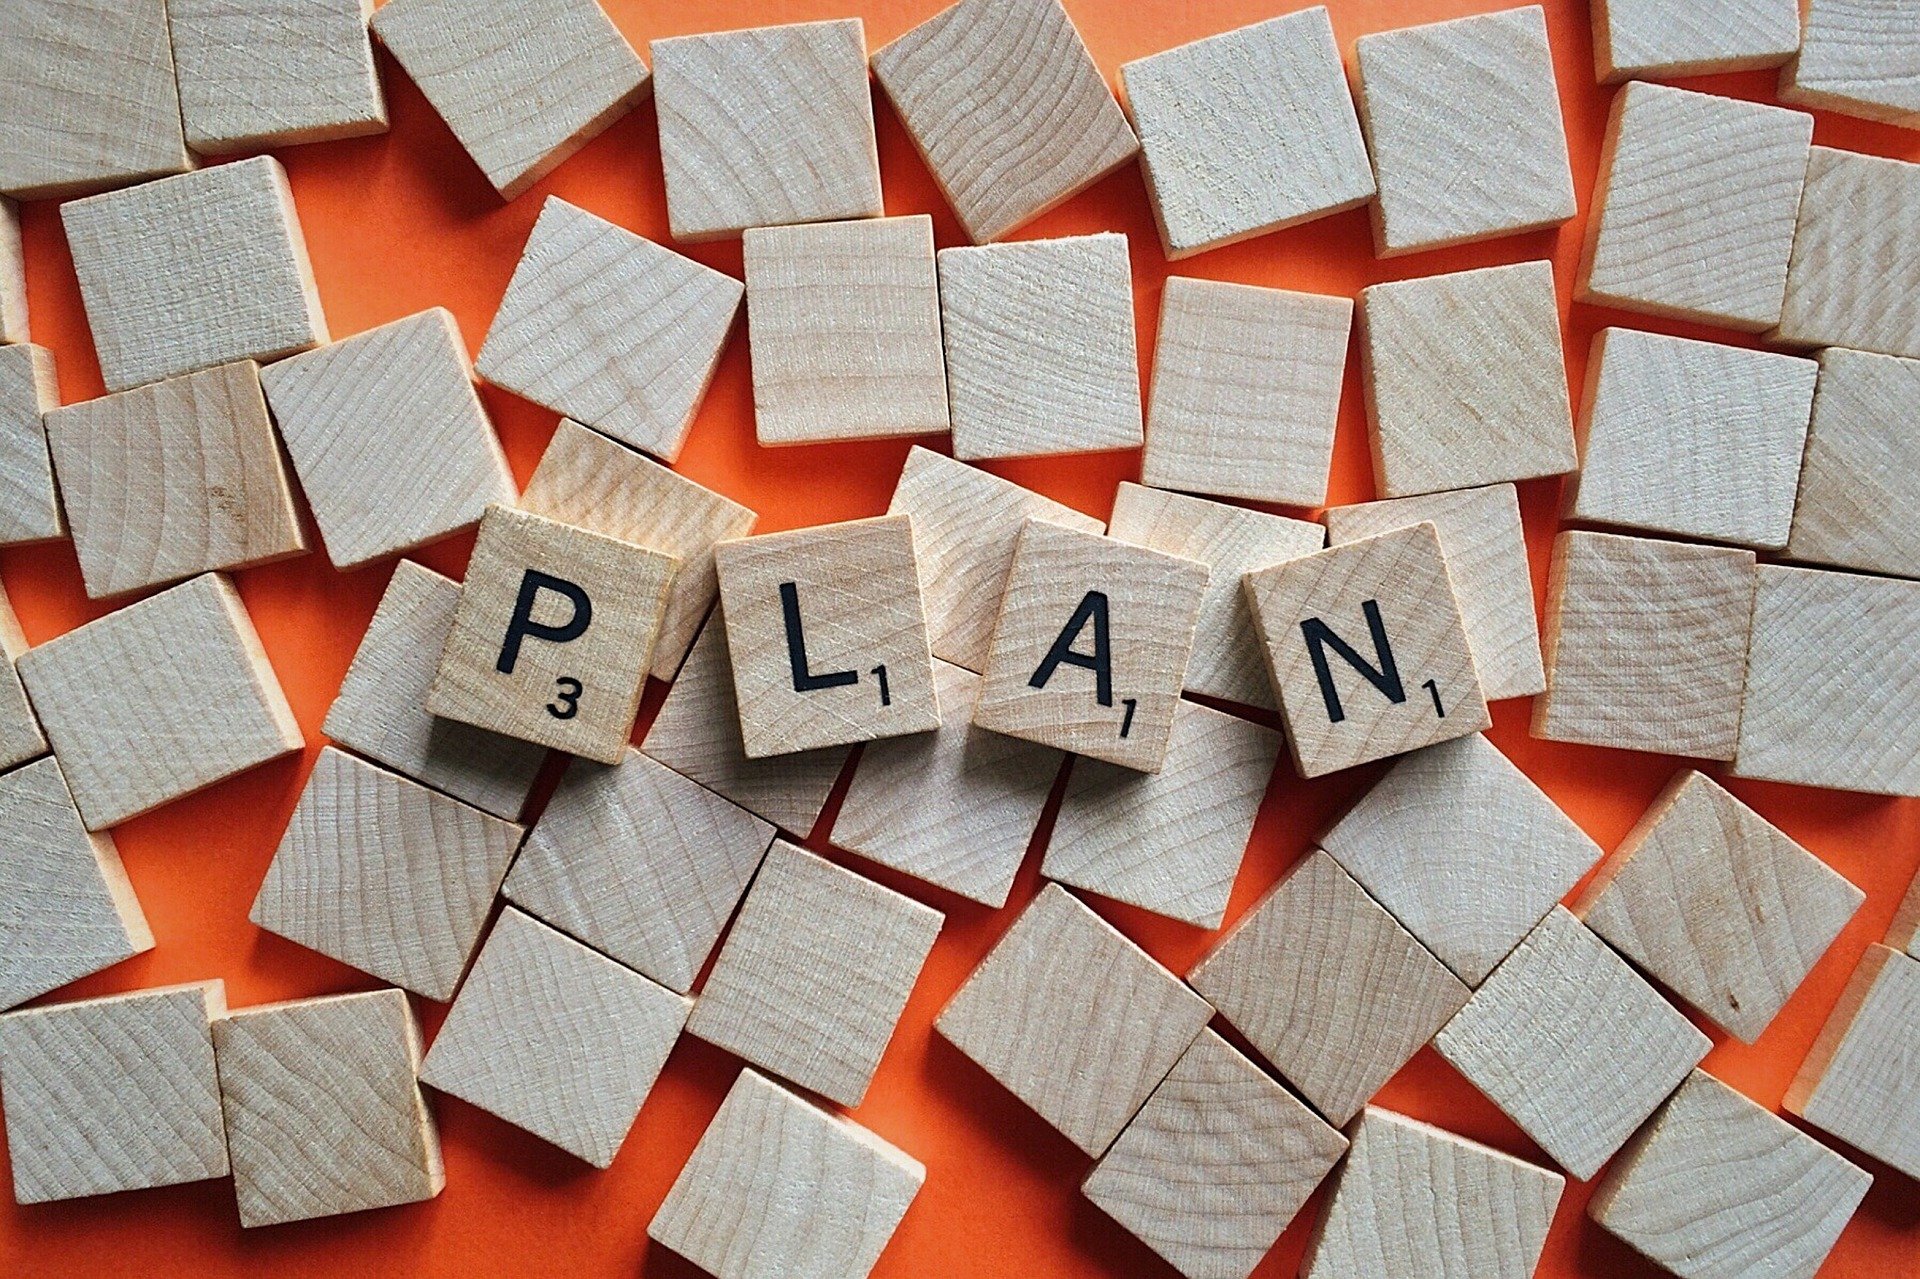 Develop, implement and evaluate an operational plan